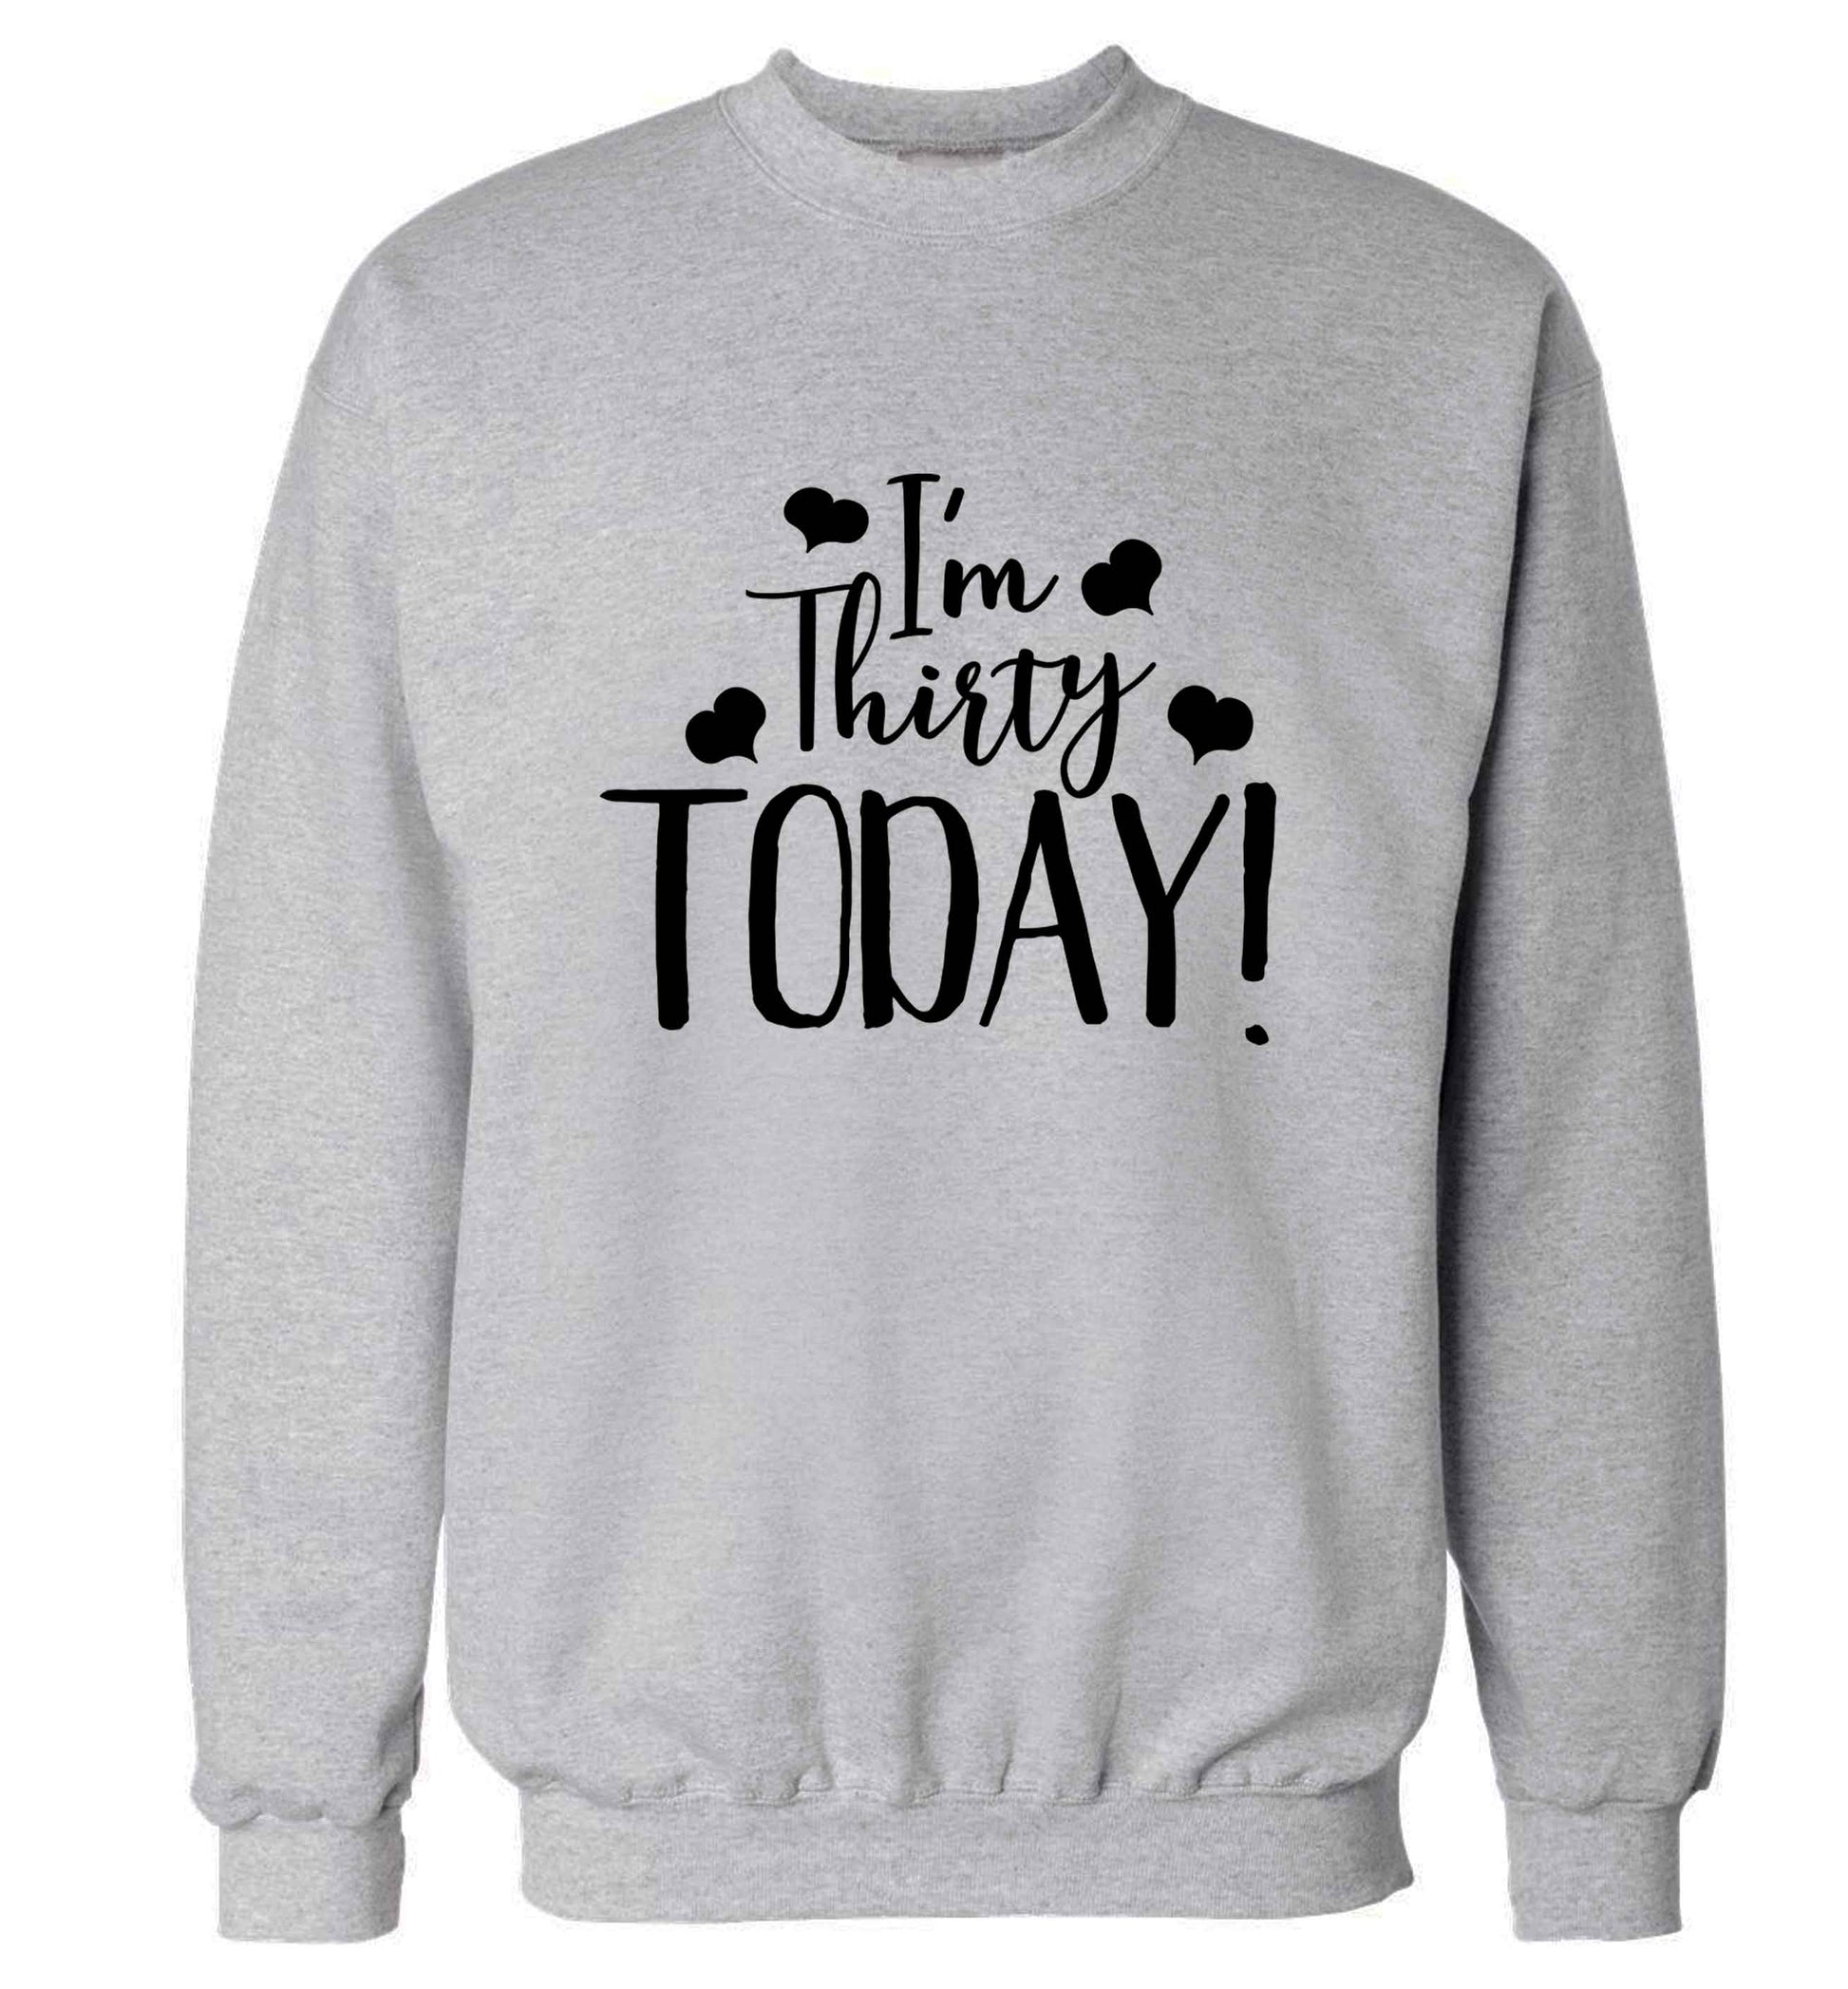 I'm thirty today! adult's unisex grey sweater 2XL